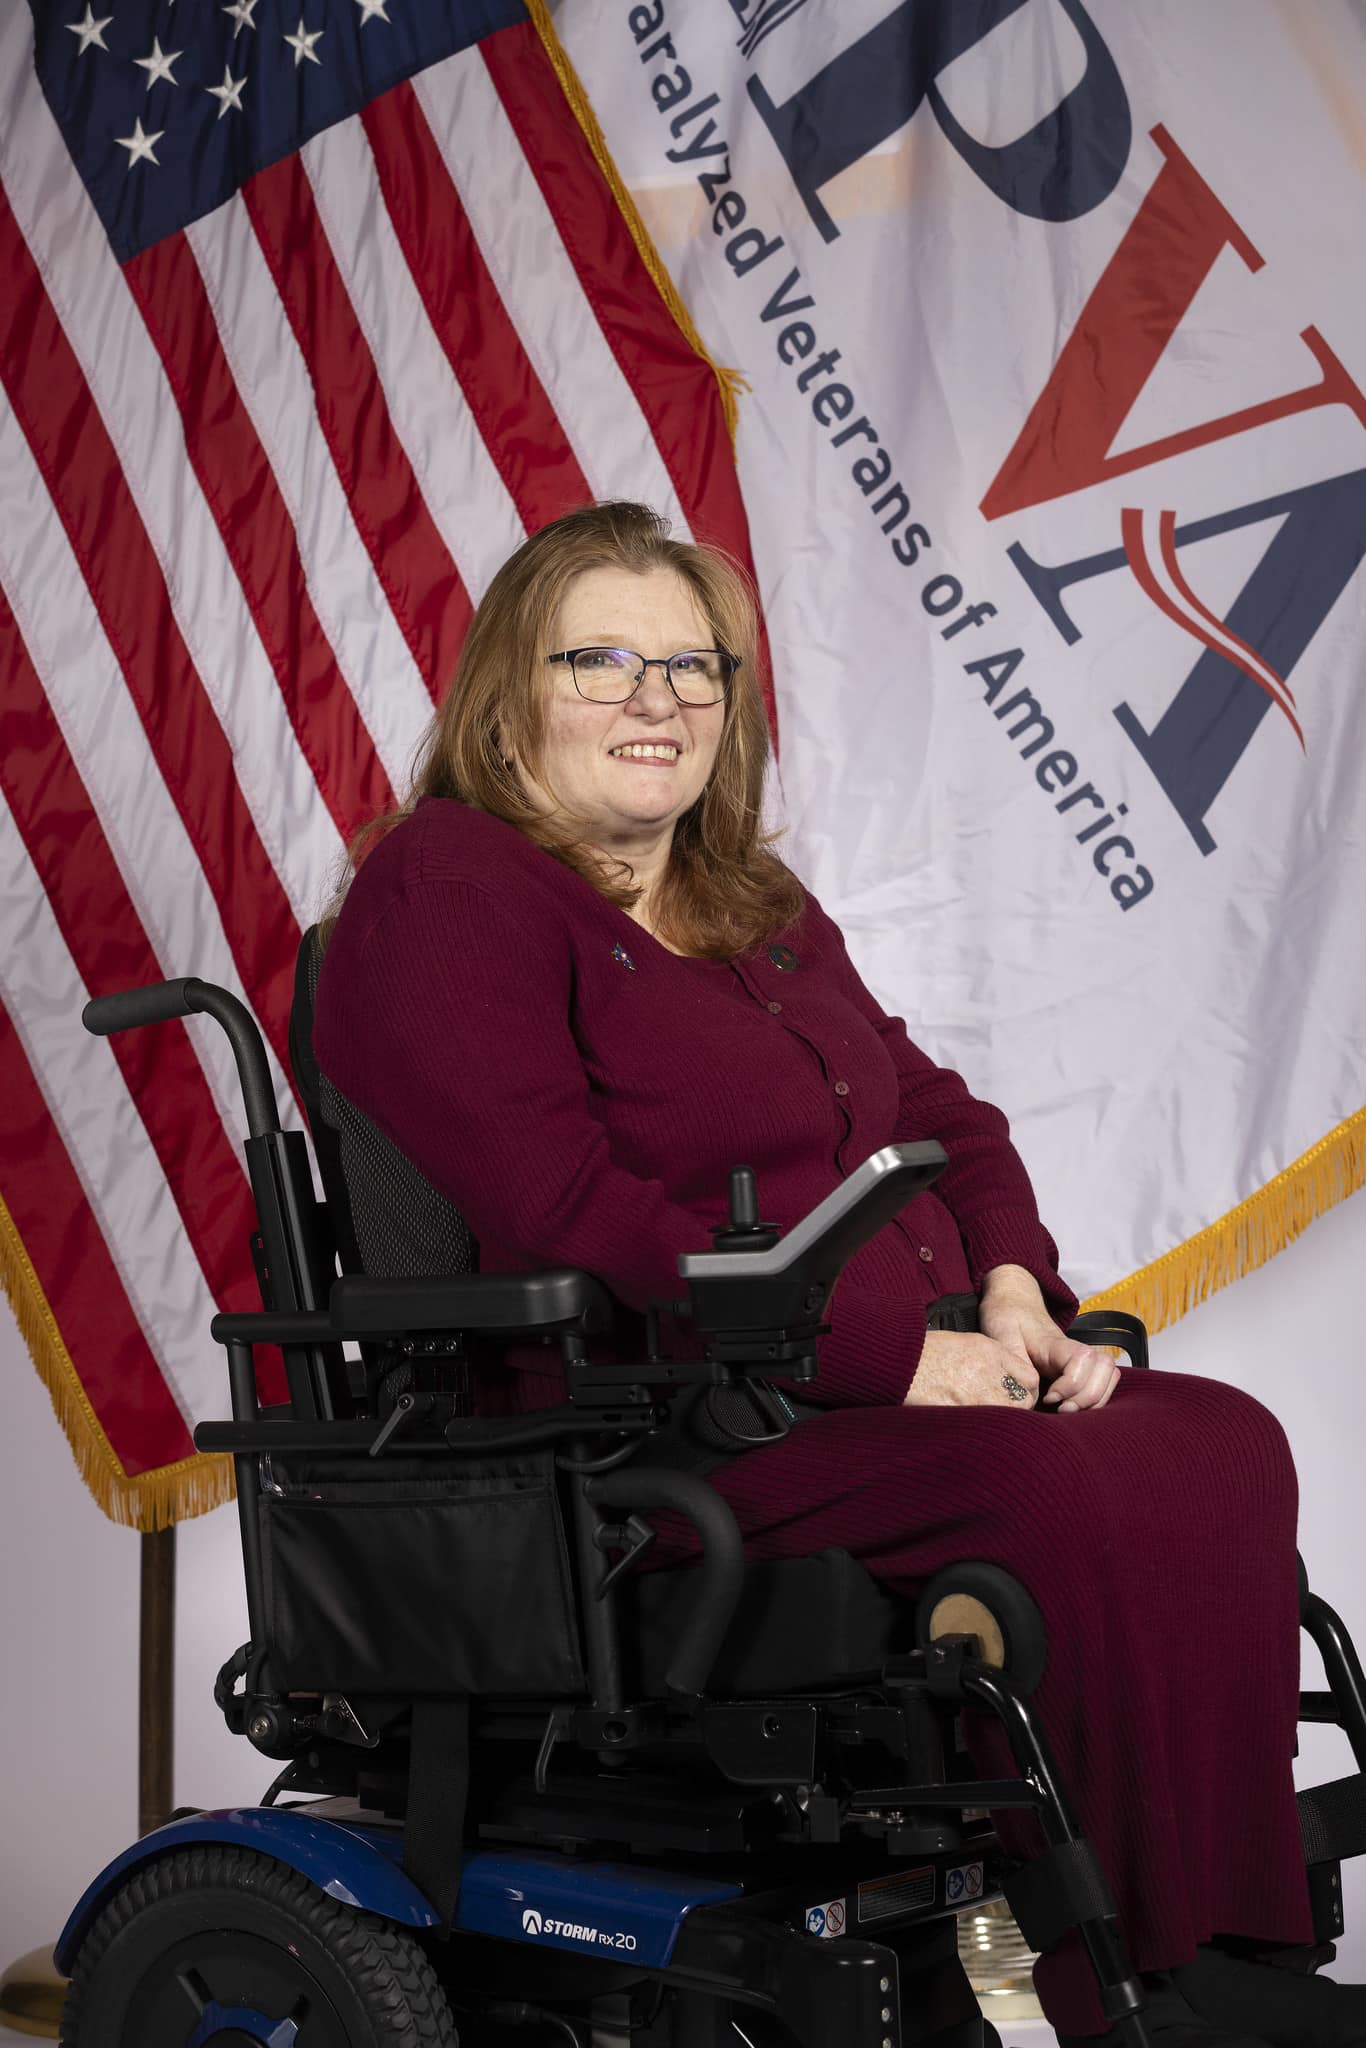 A woman with long, light brown hair and glasses is sitting in a wheelchair. She is wearing a maroon outfit and smiling. Behind her is an American flag and a large banner with the text "Paralyzed Veterans of America".